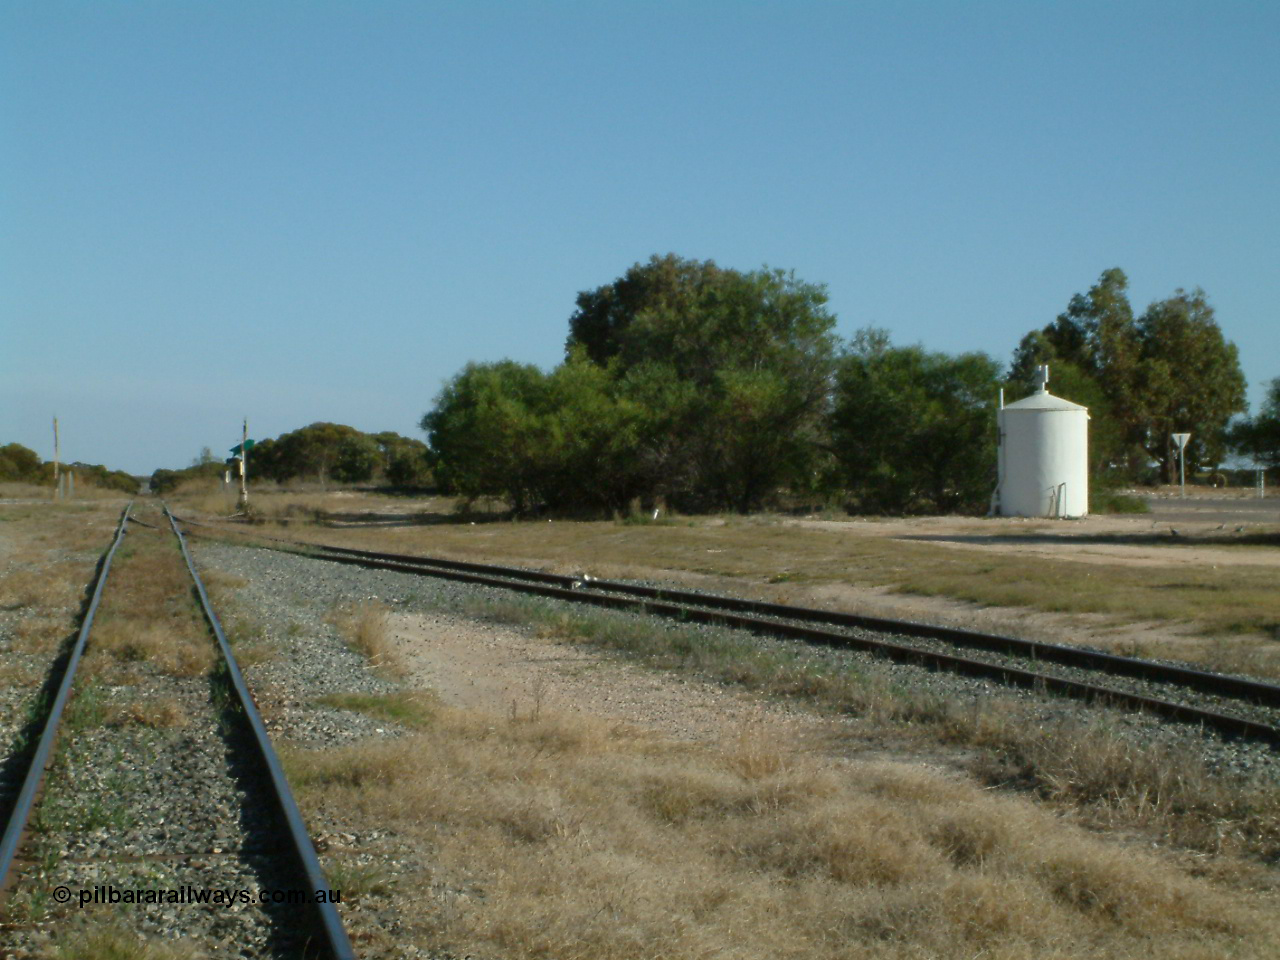 030405 155852
Lock, yard view looking south, grain silo siding point lever and indicator with derail, circular concrete toilet for grain complex, grade crossing for Birdseye Hwy visible in the distance. 5th April 2003.
